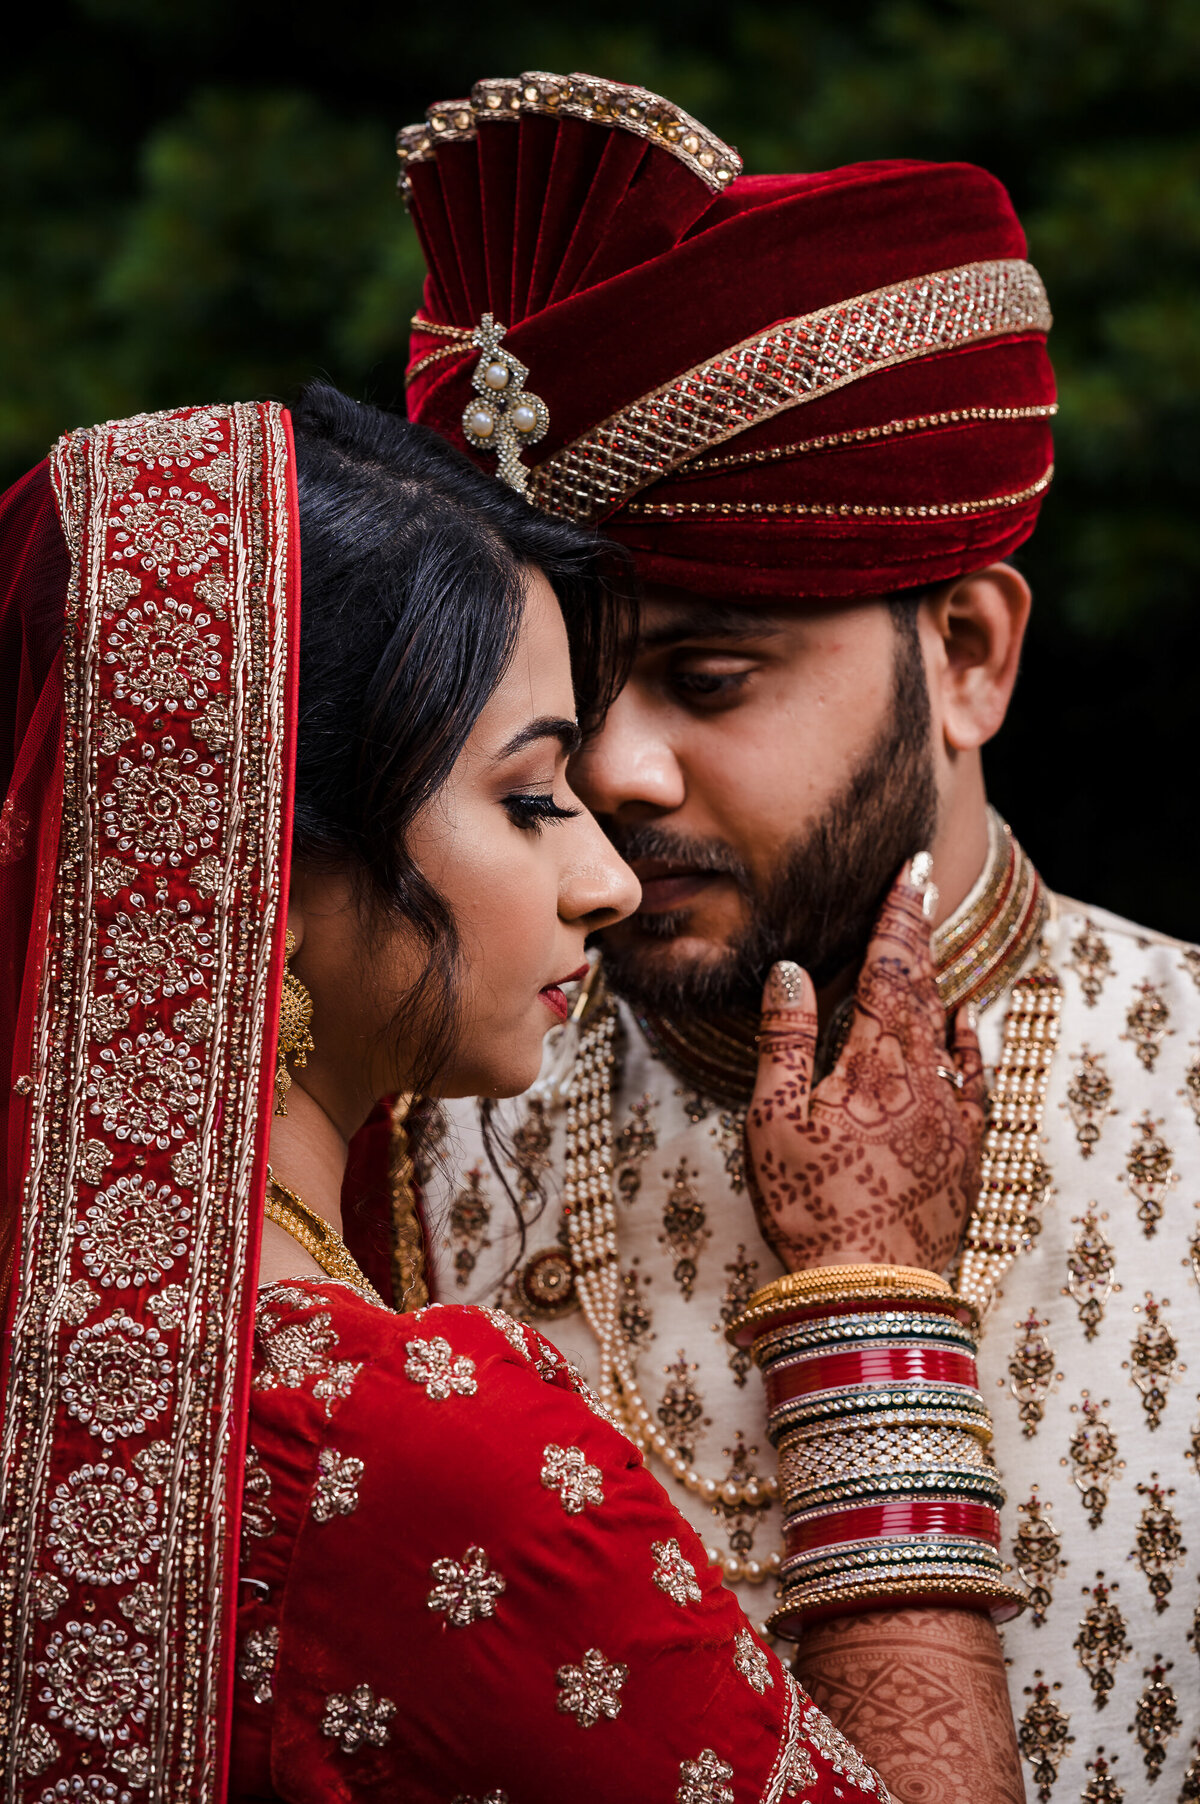 NJ specialists for vibrant & timeless Indian wedding photos.